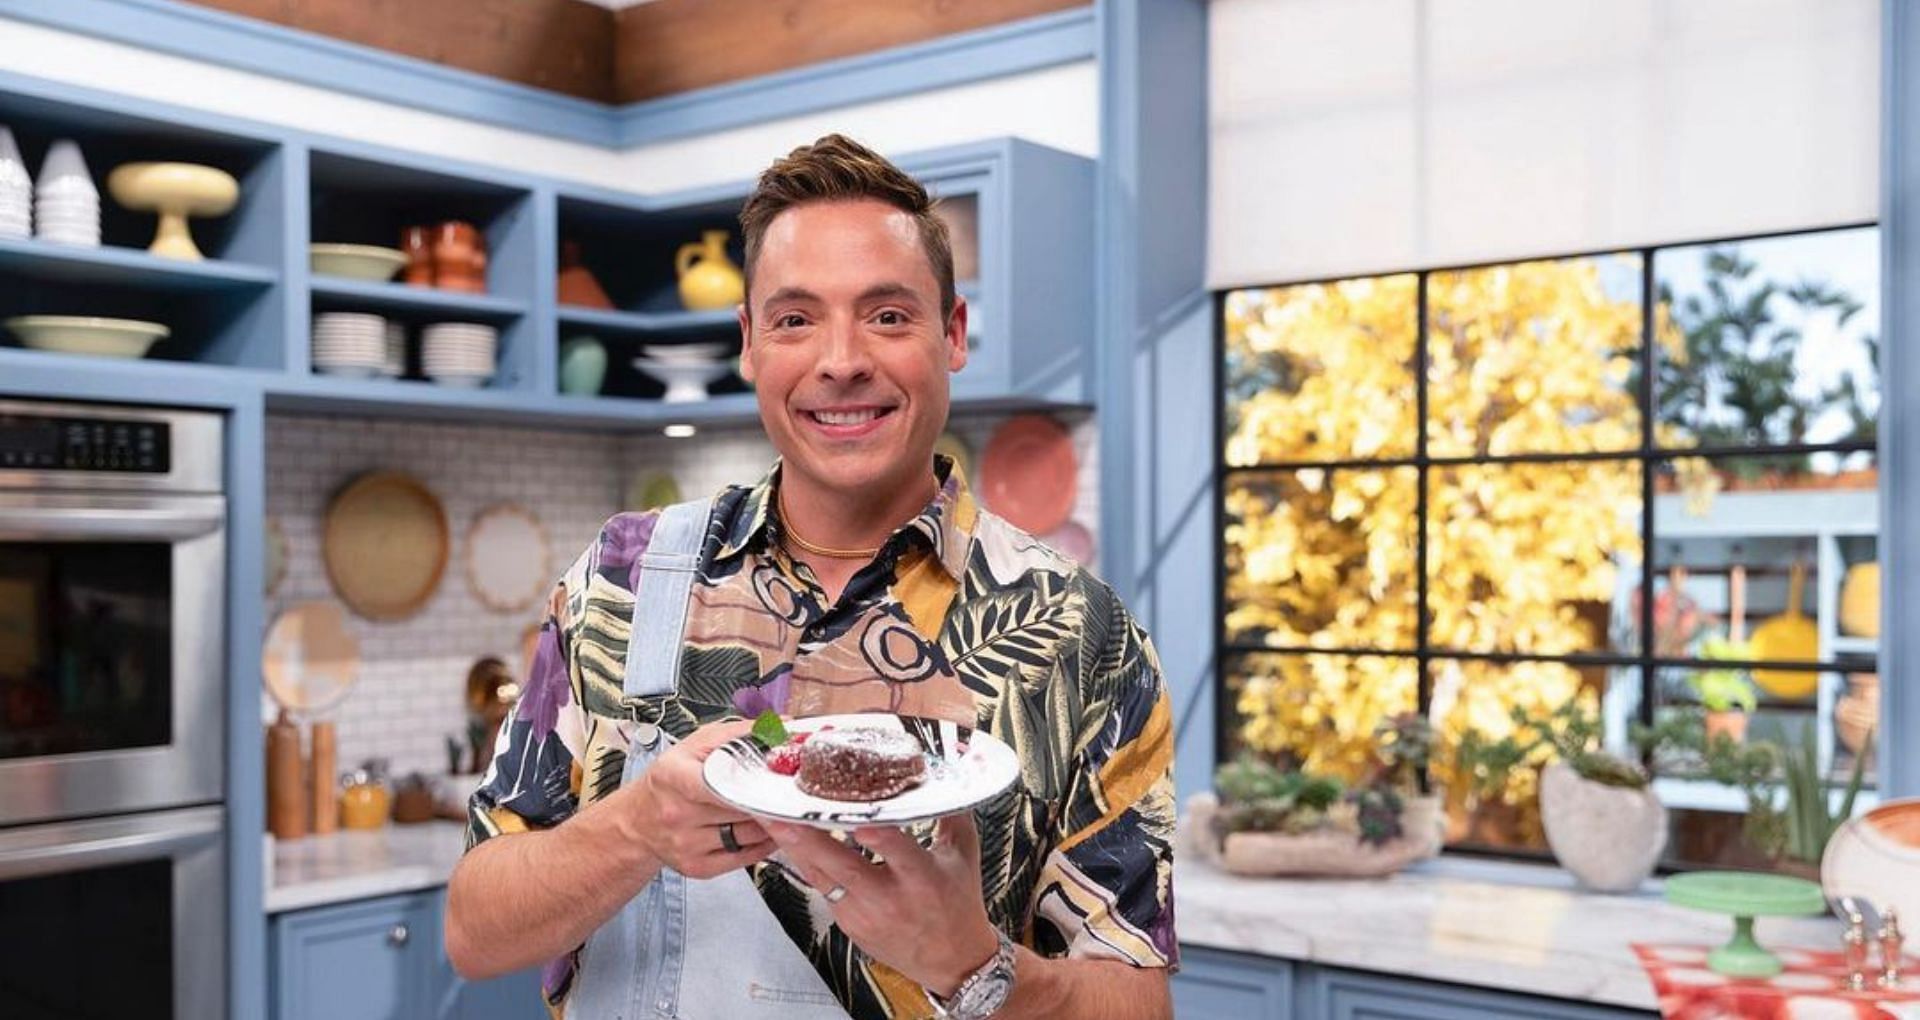 Jeff Mauro to serve as host on Holiday Wars